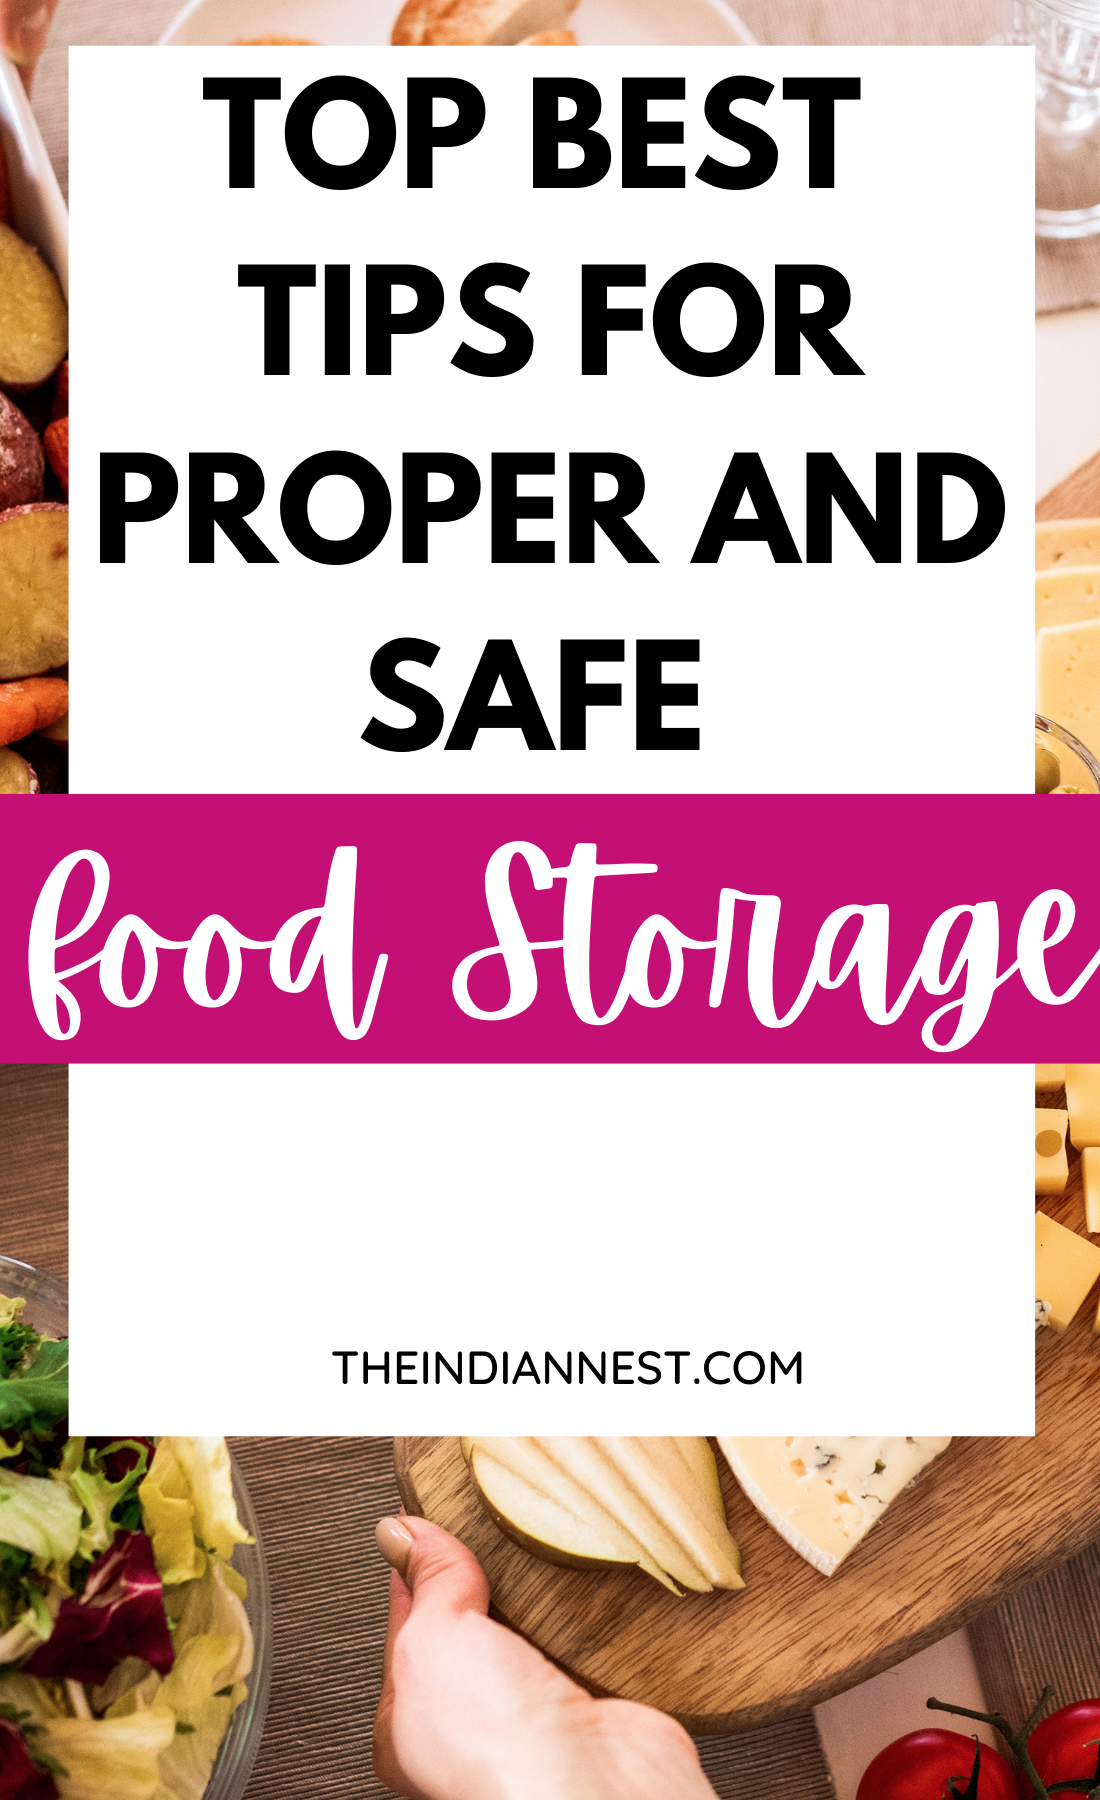 Proper and Safe Food Storage Tips That Saves Money